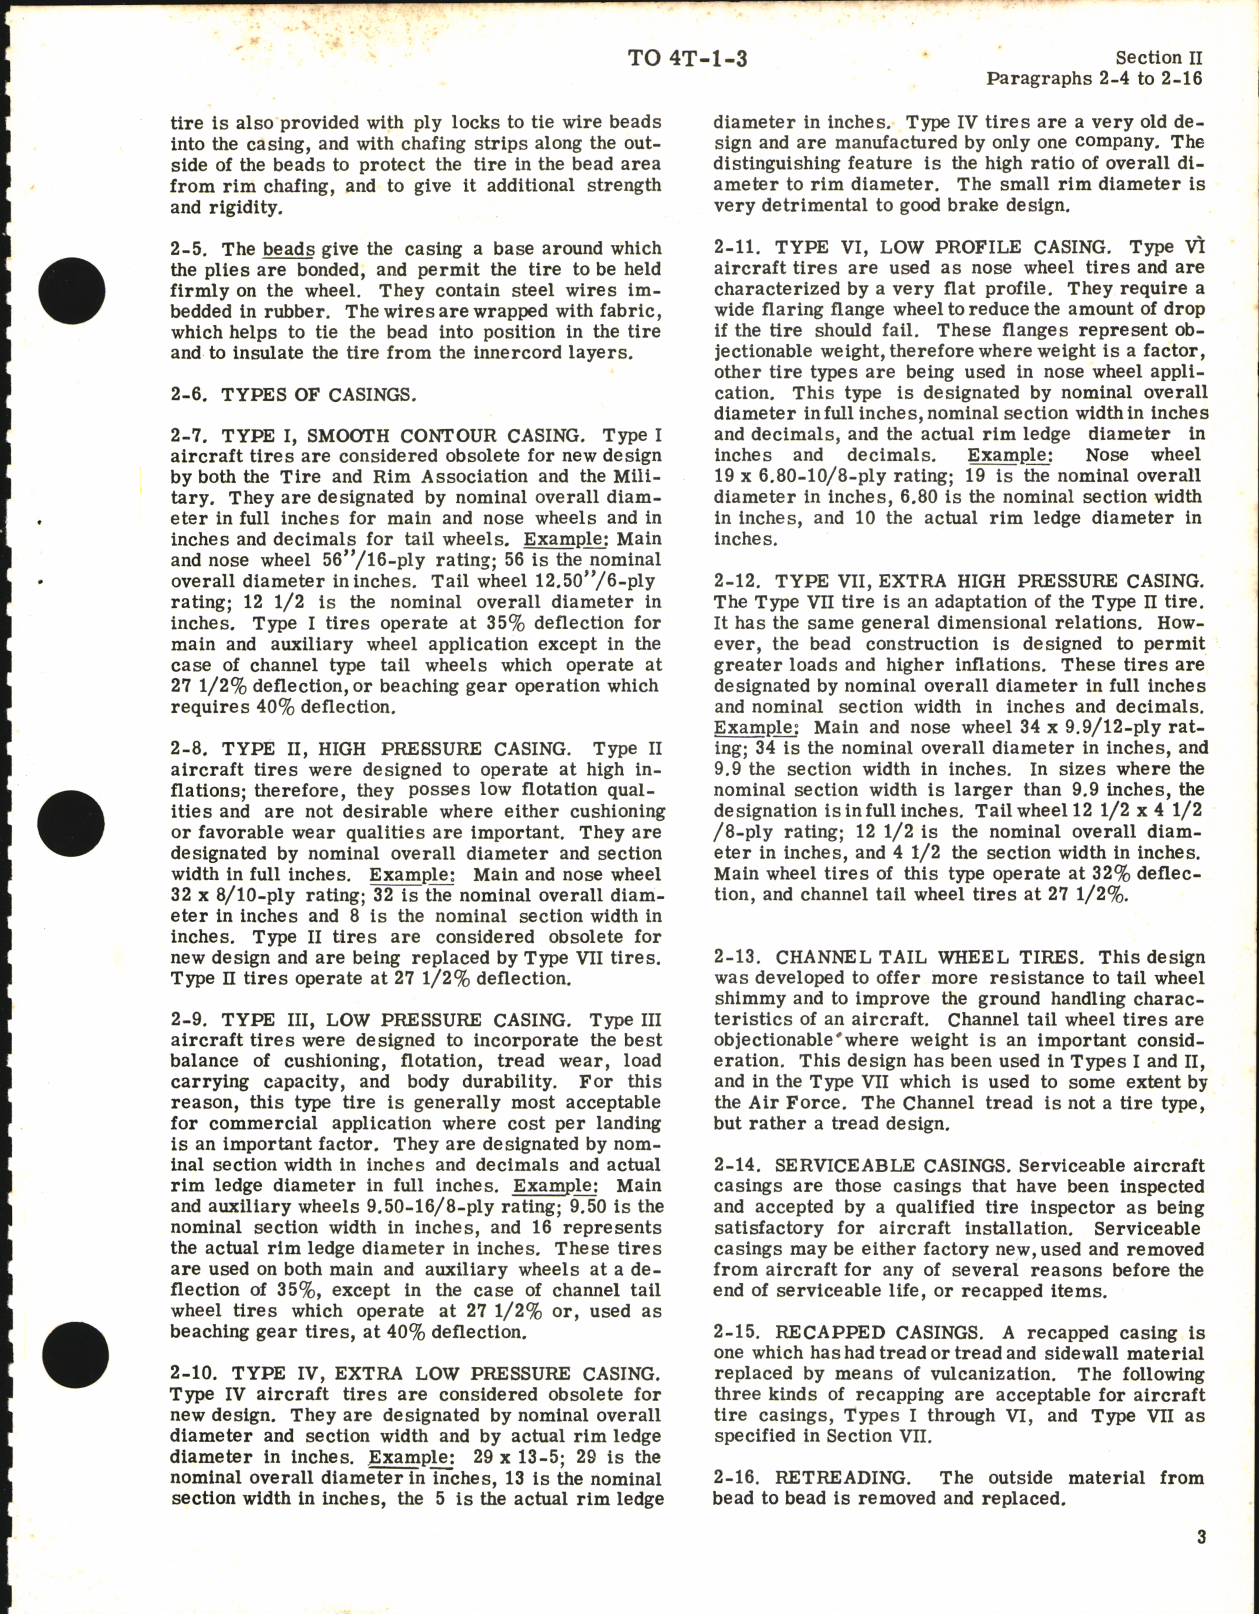 Sample page 5 from AirCorps Library document: Inspection, Maintenance, Storage, and Disposition of Aircraft Tire Casings and Inner Tubes